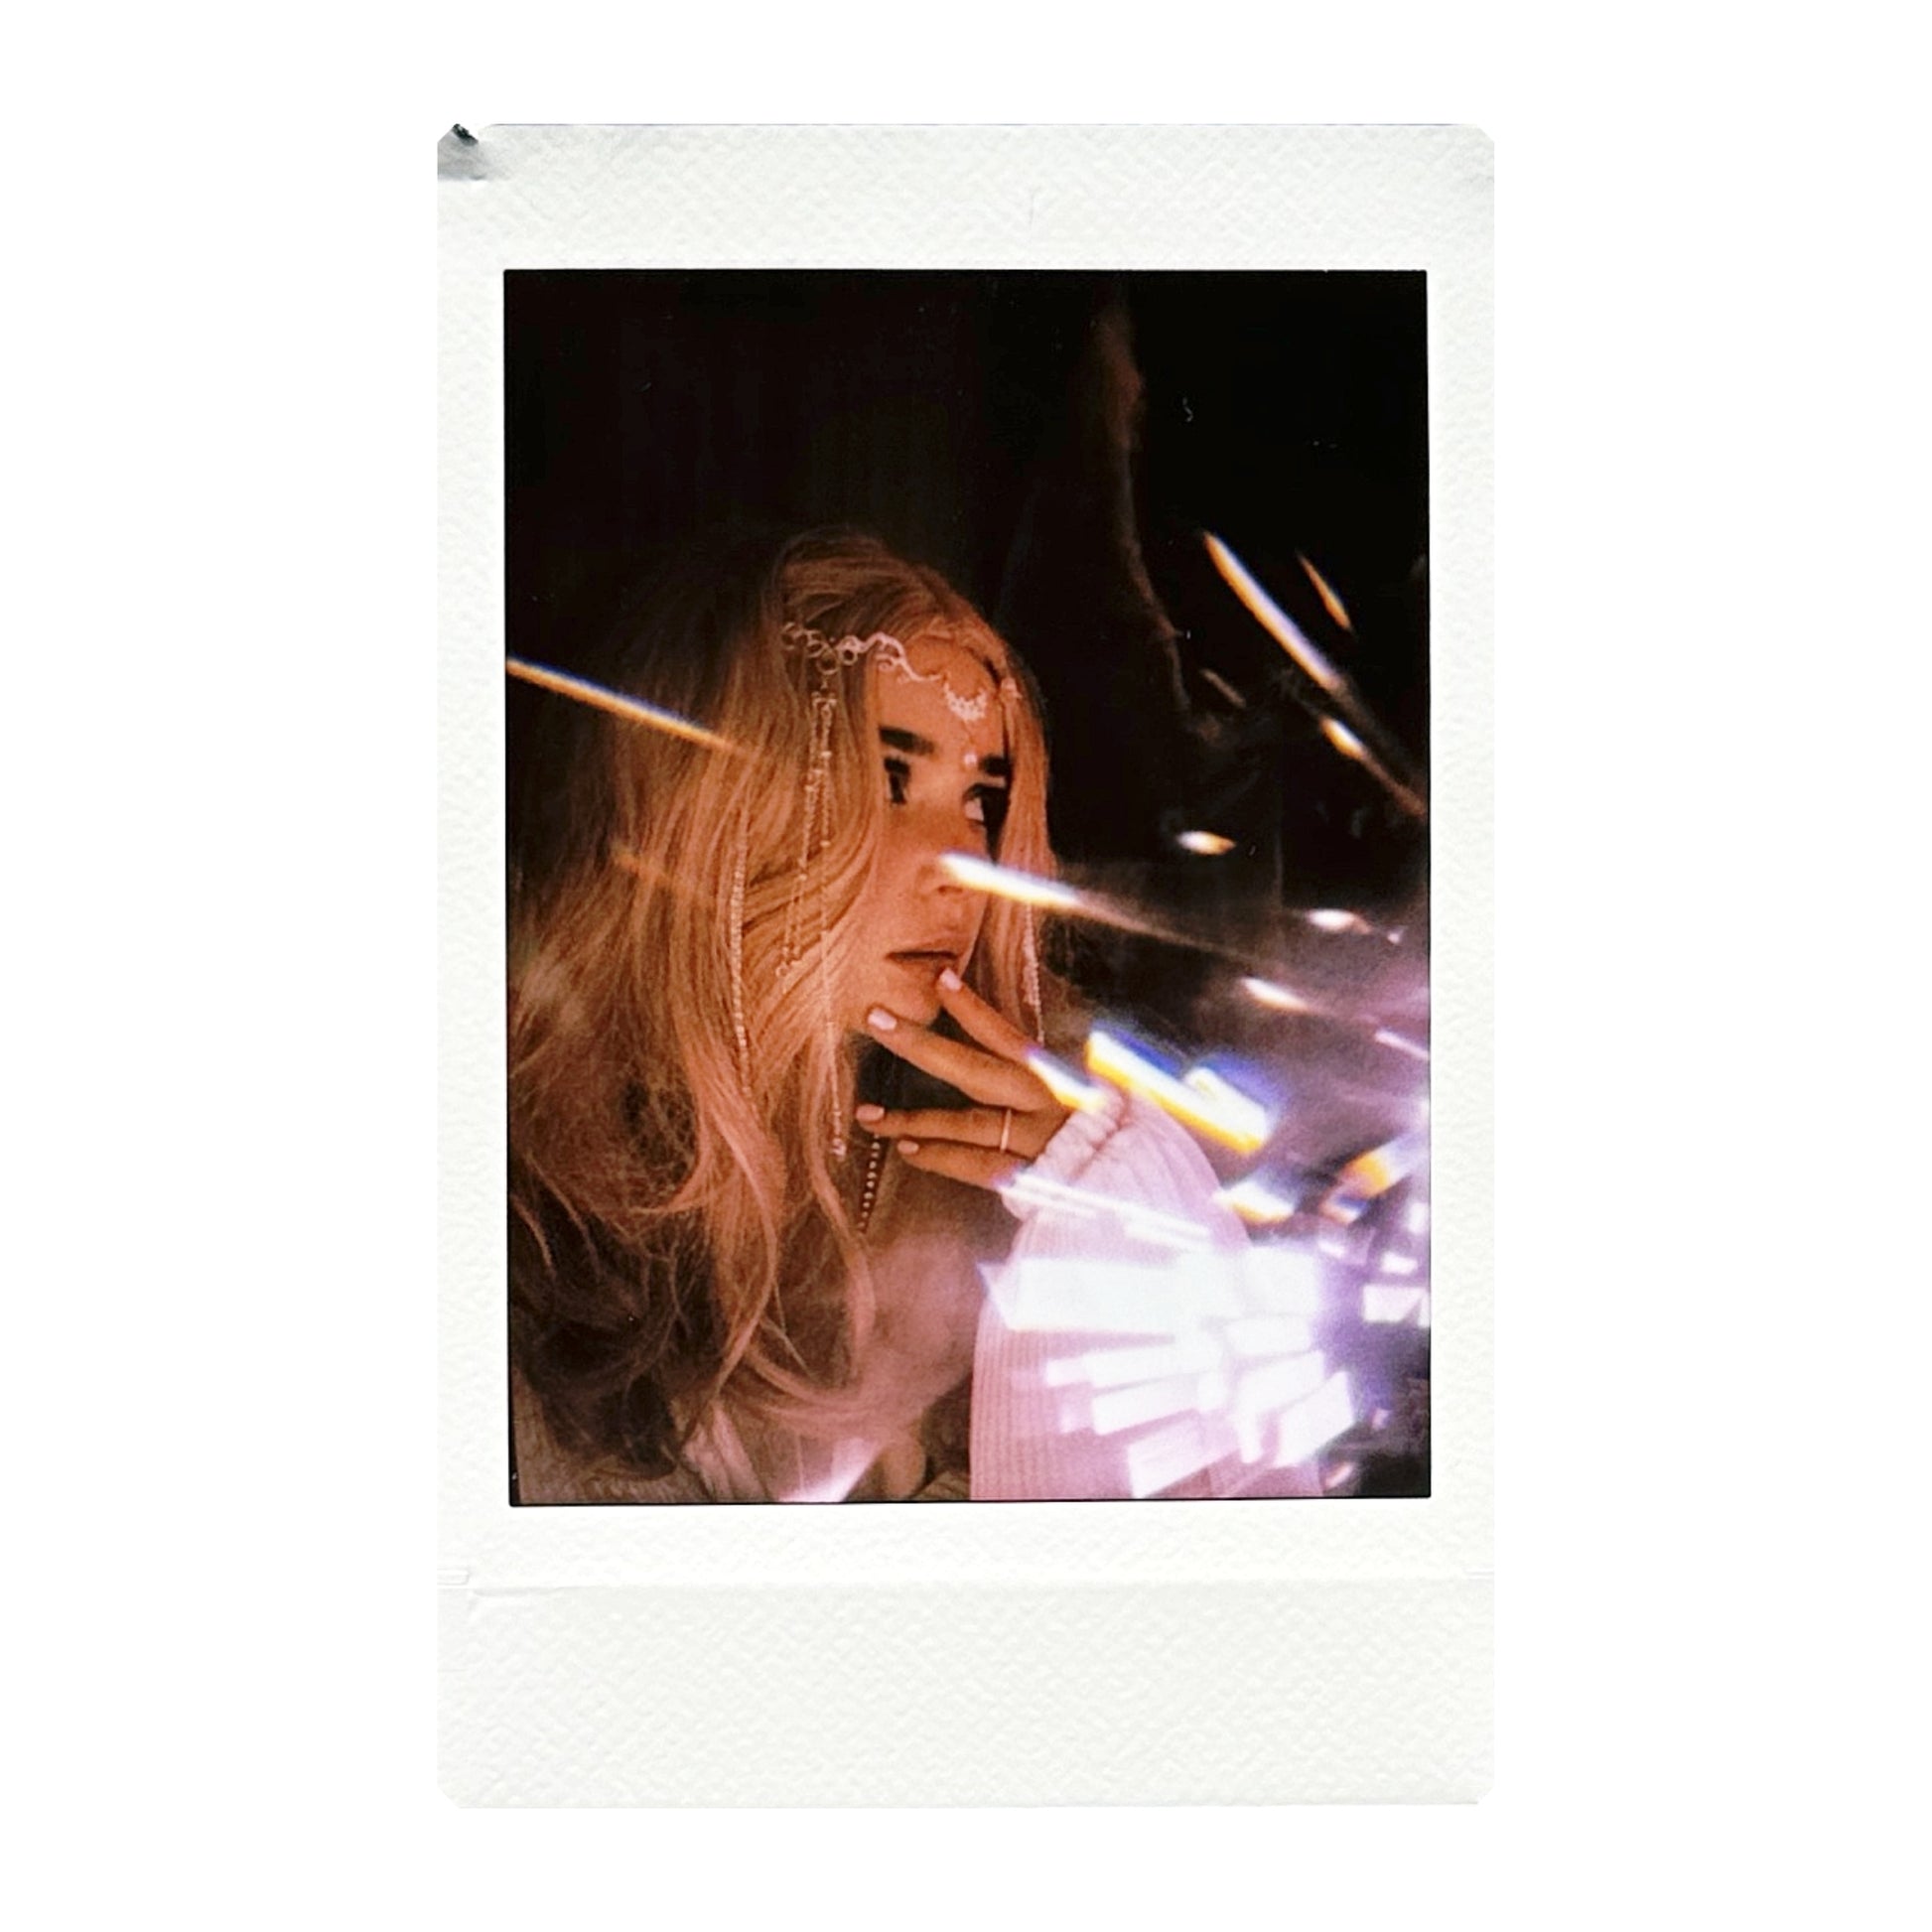 Double exposure instant photo of the girl and the flares made with Jollylook EYE